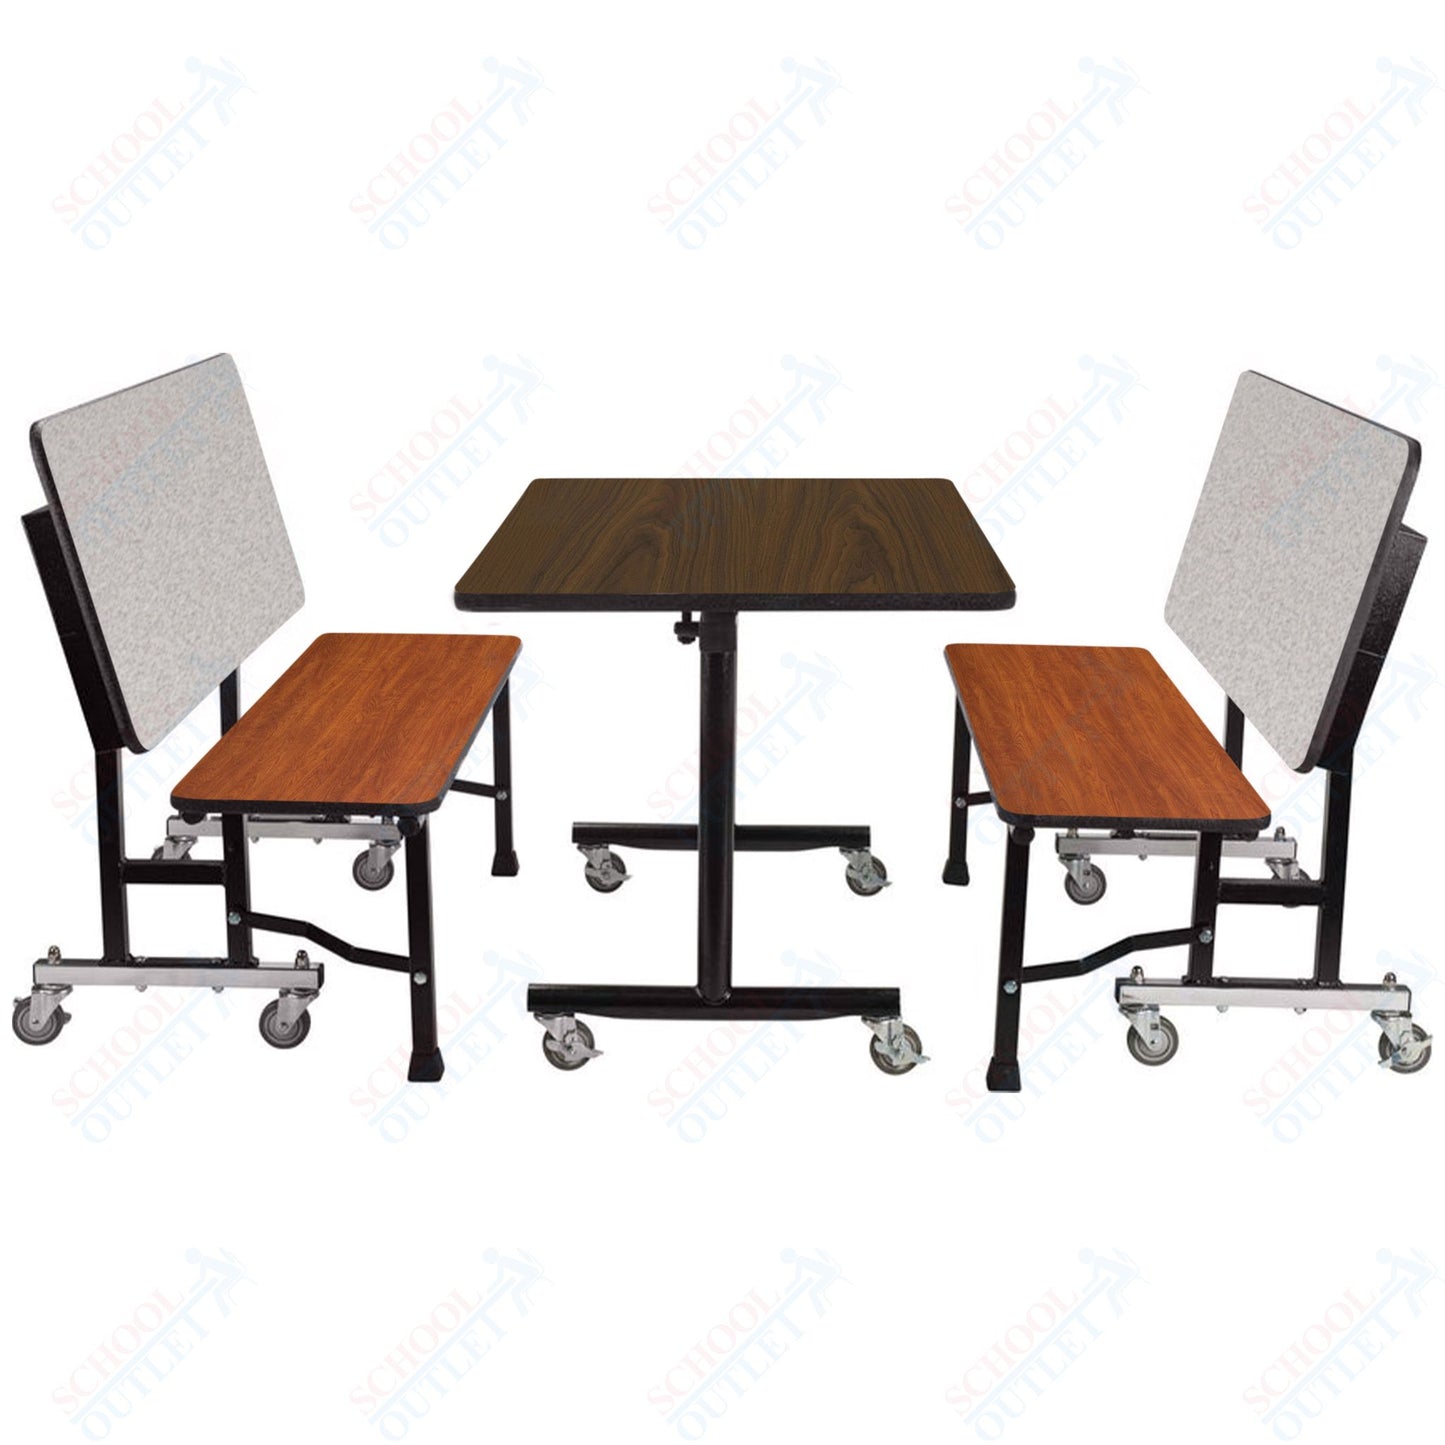 NPS ToGo Booth Set, (1) 24"x48" Table and (2) 48" Benches, MDF Core (National Public Seating NPS-TGBTH2448MDPE)